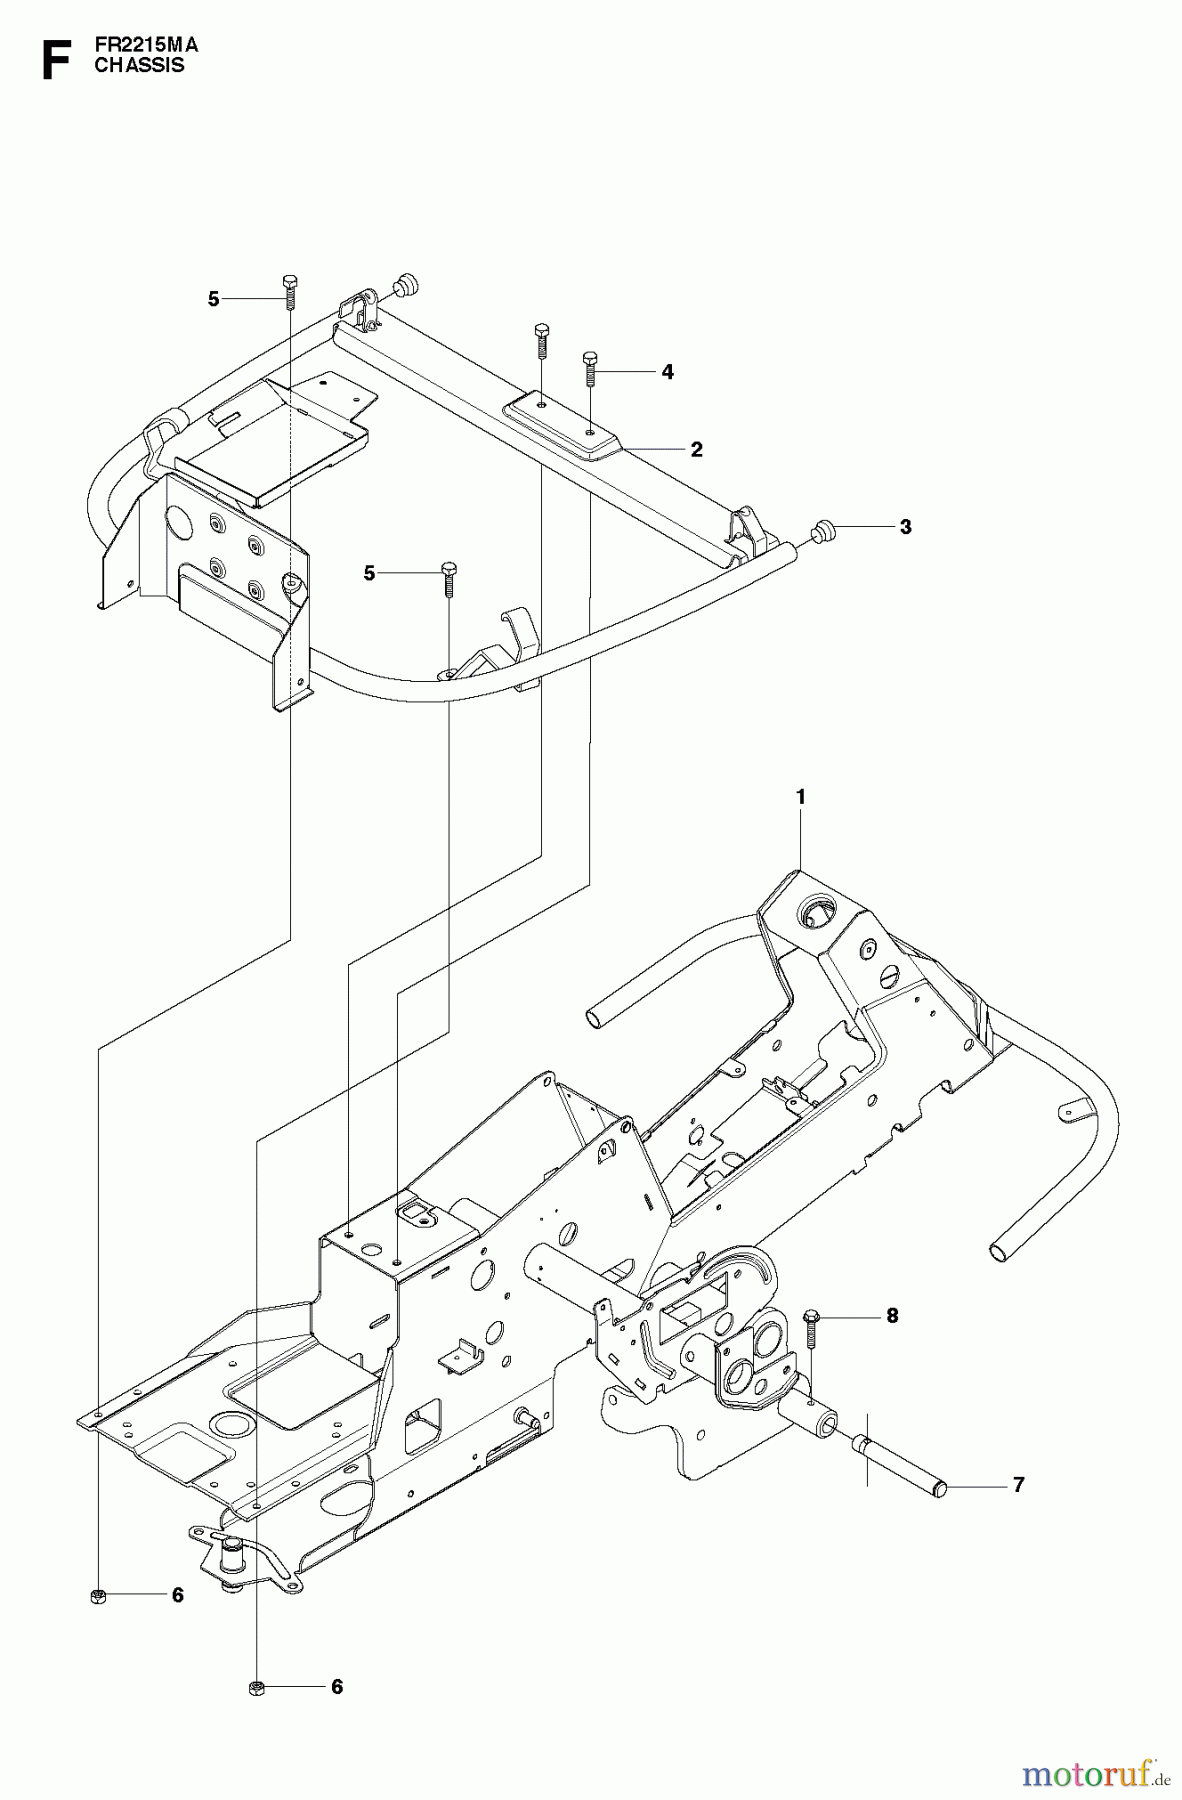  Jonsered Reitermäher FR2215 MA (966632101) - Jonsered Rear-Engine Riding Mower (2011) CHASSIS ENCLOSURES